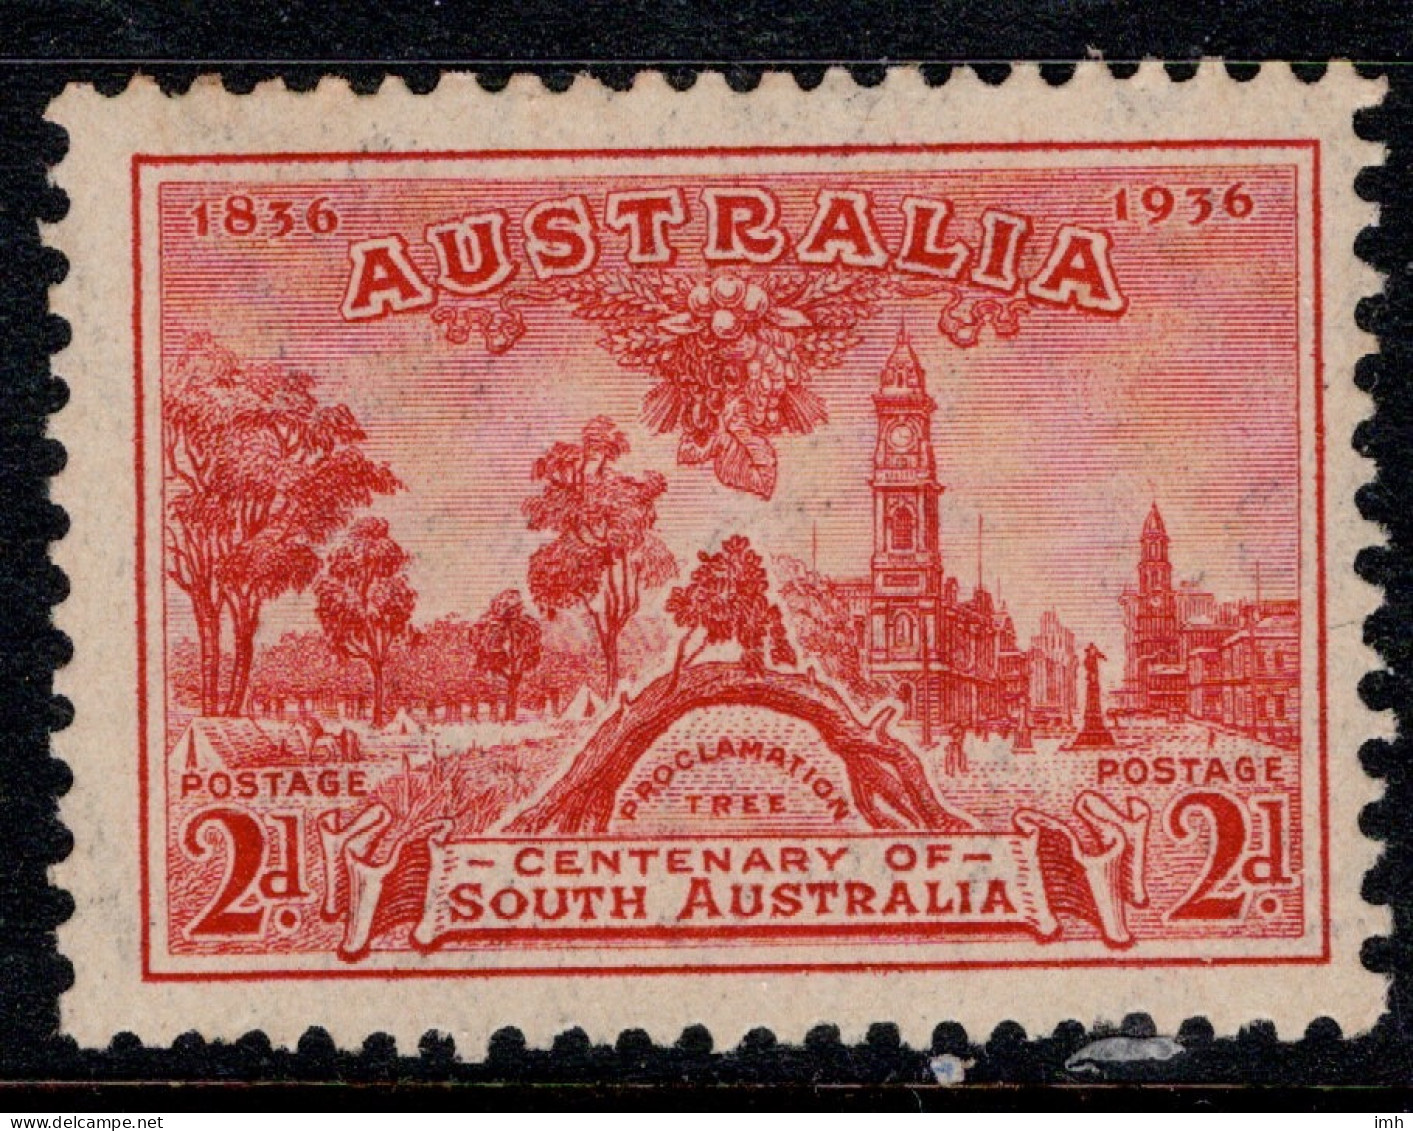 1936 Australia, SG 161  2d Red  Centenary Of South Australia,  Mint Lightly Hinged. Cat £4 - Mint Stamps